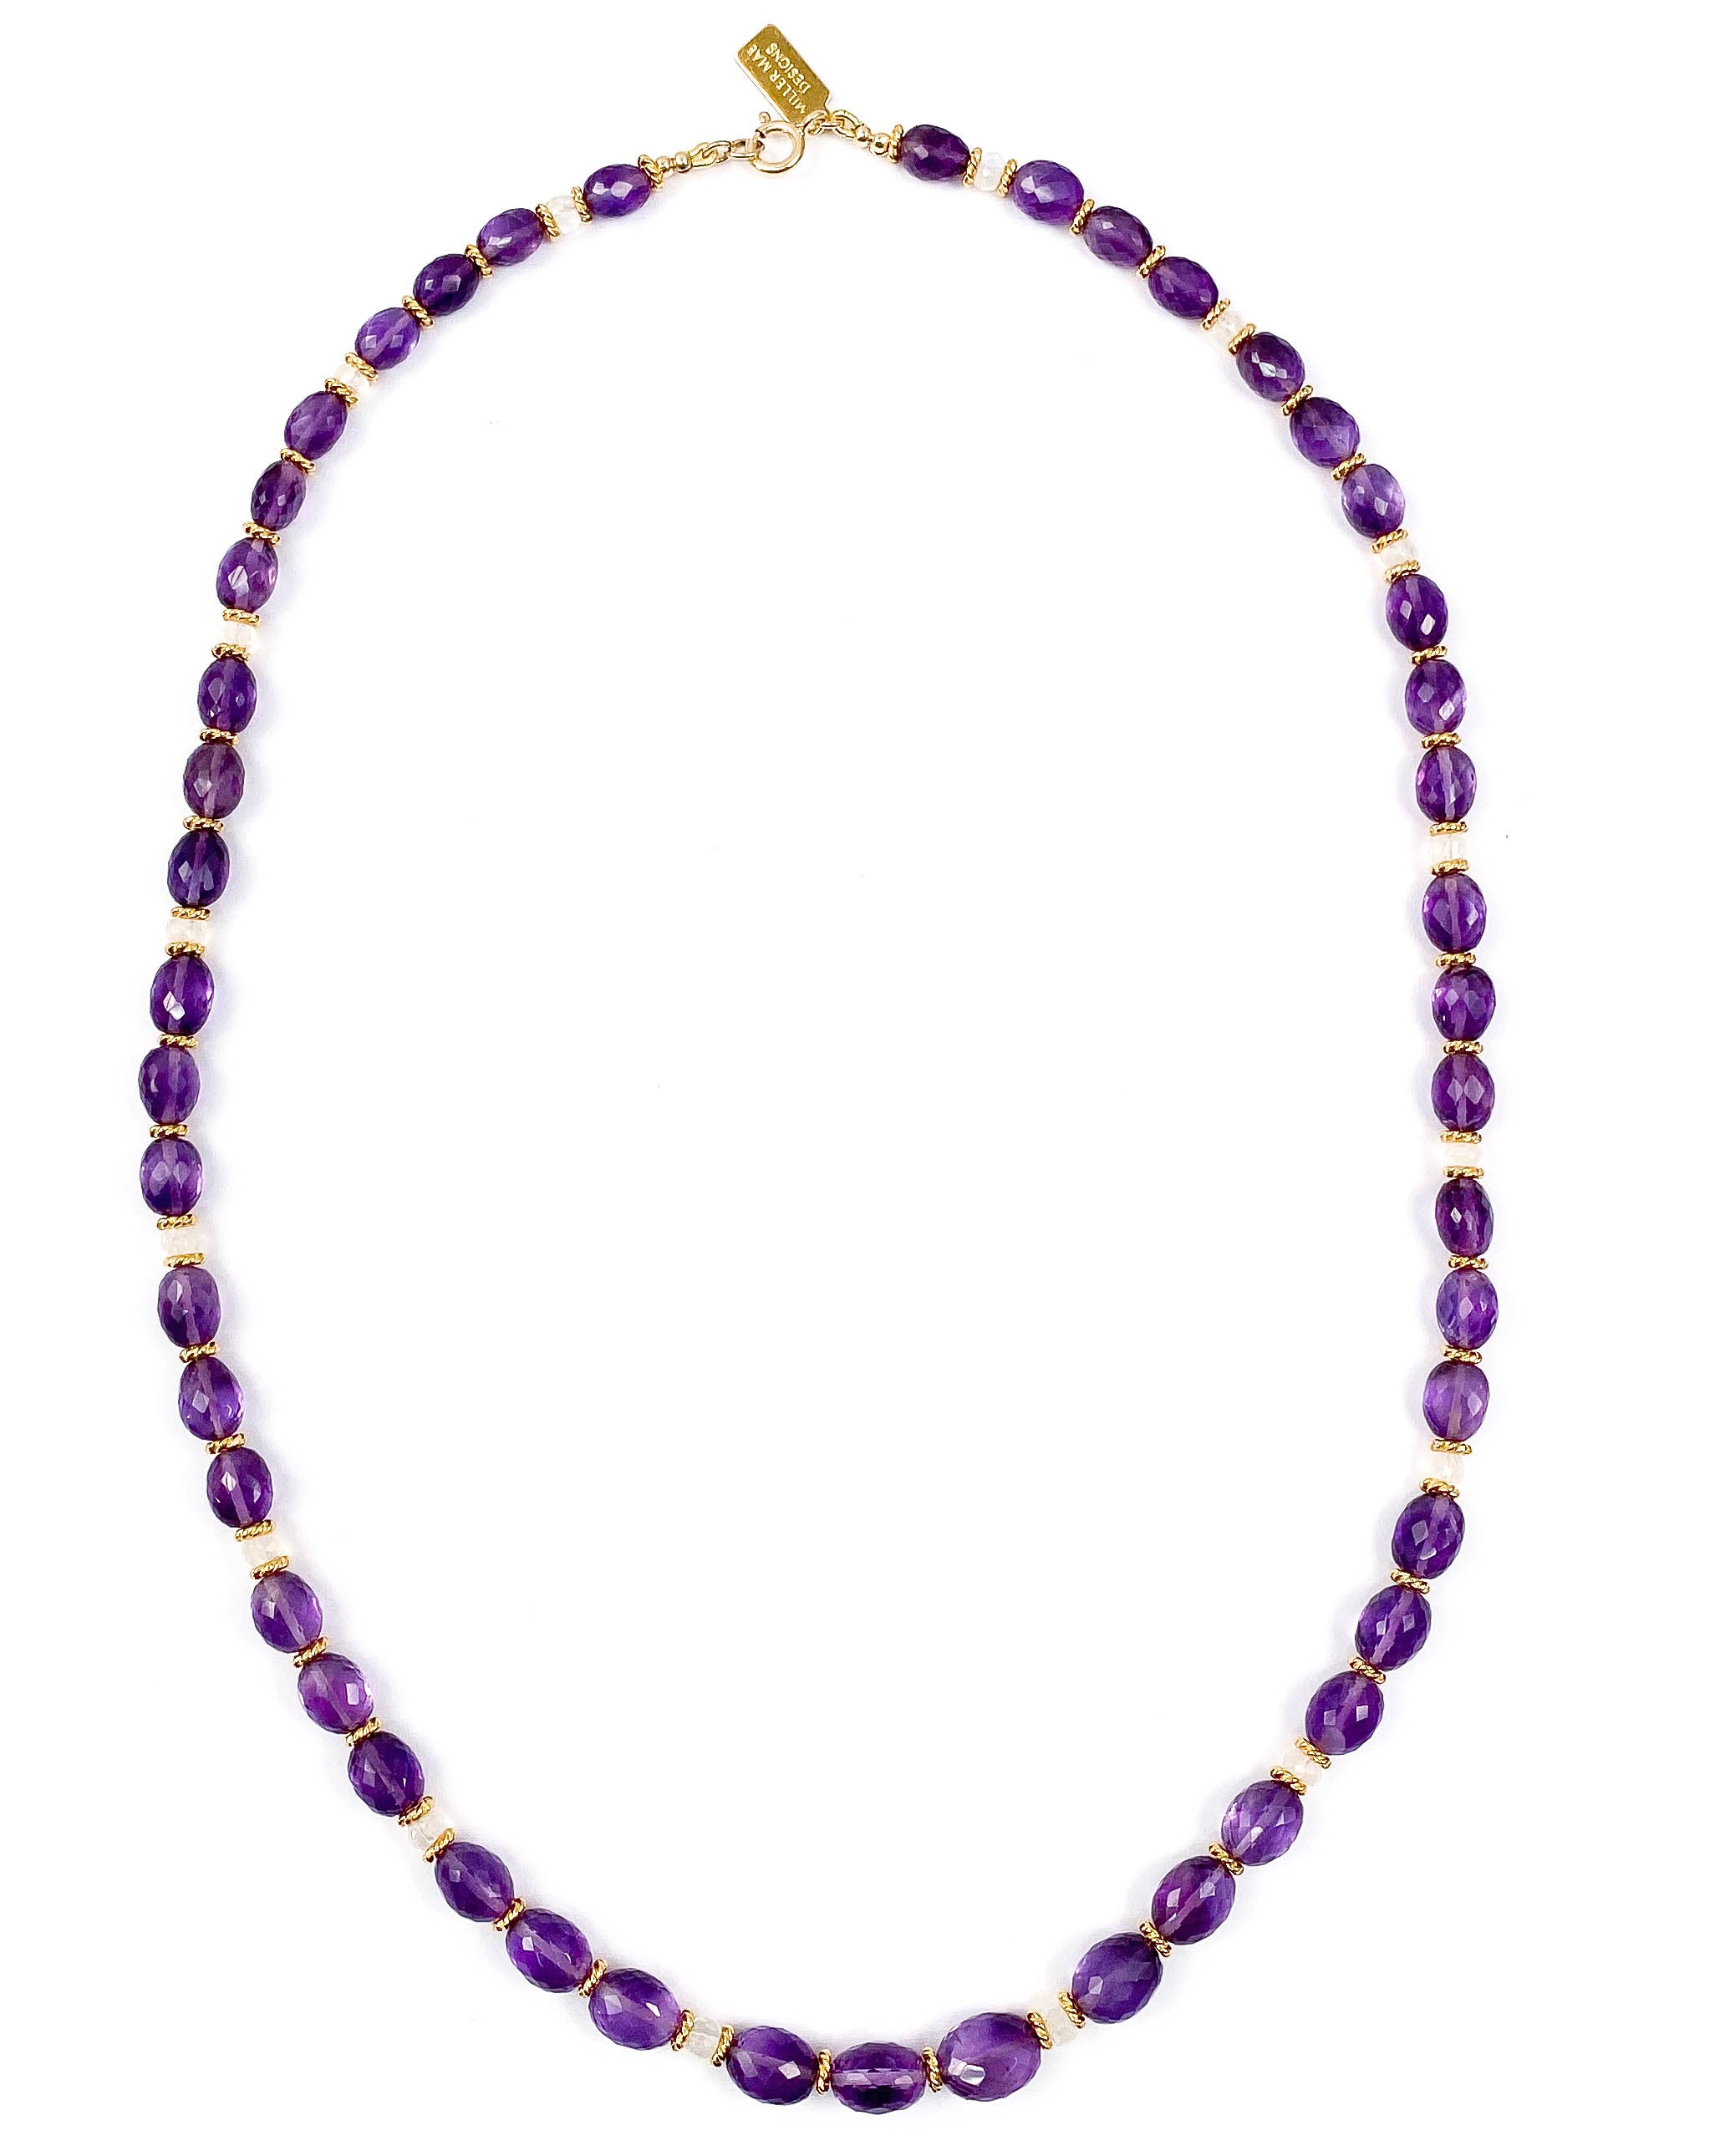 Faceted Amethyst and White Moonstone Strand Necklace